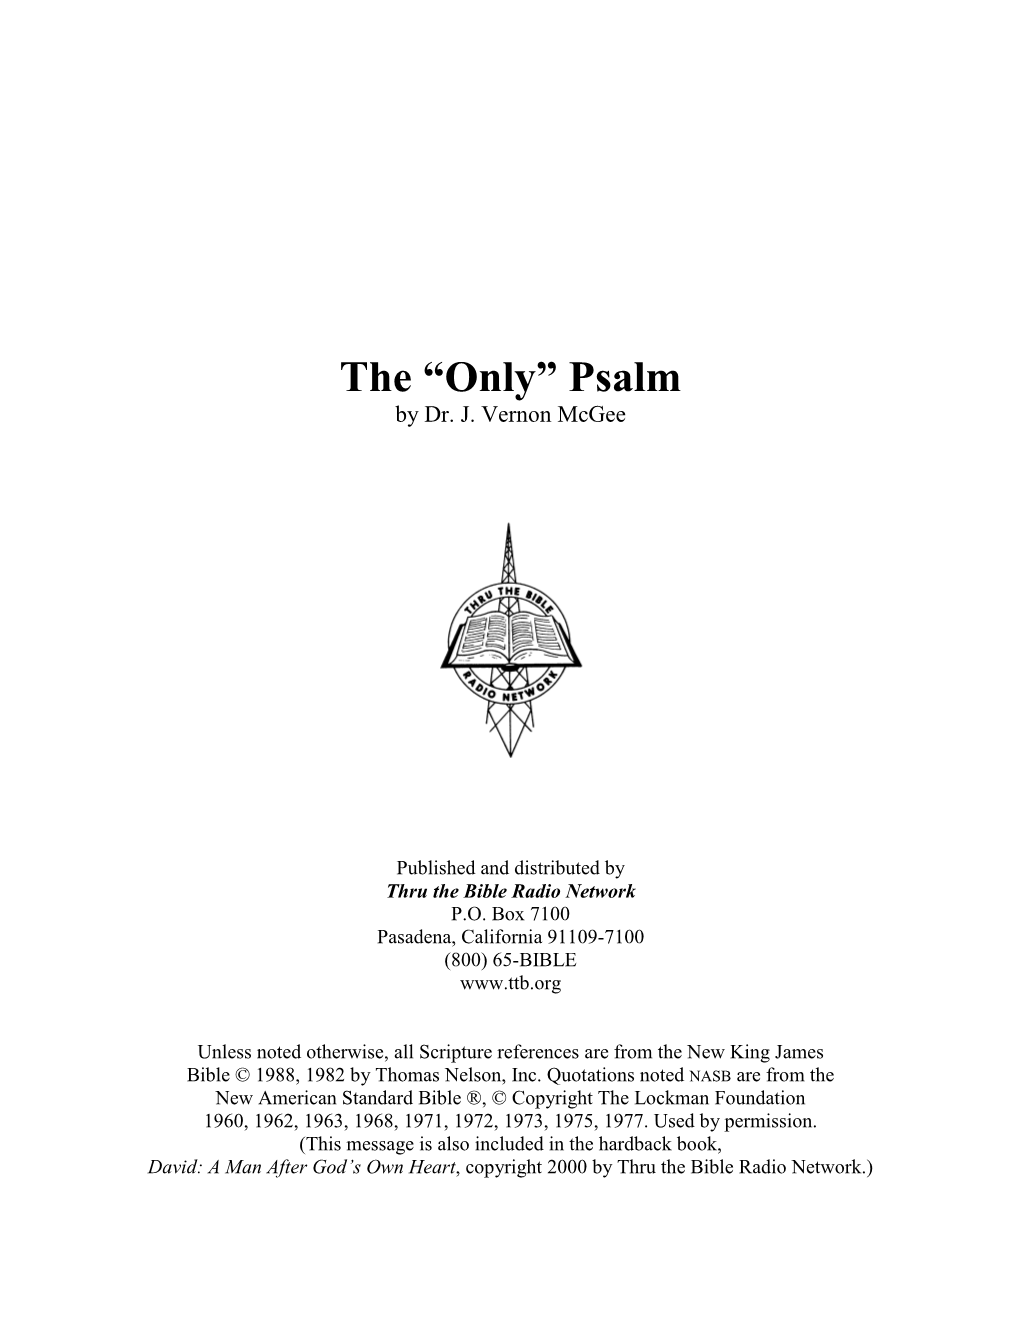 The “Only” Psalm by Dr